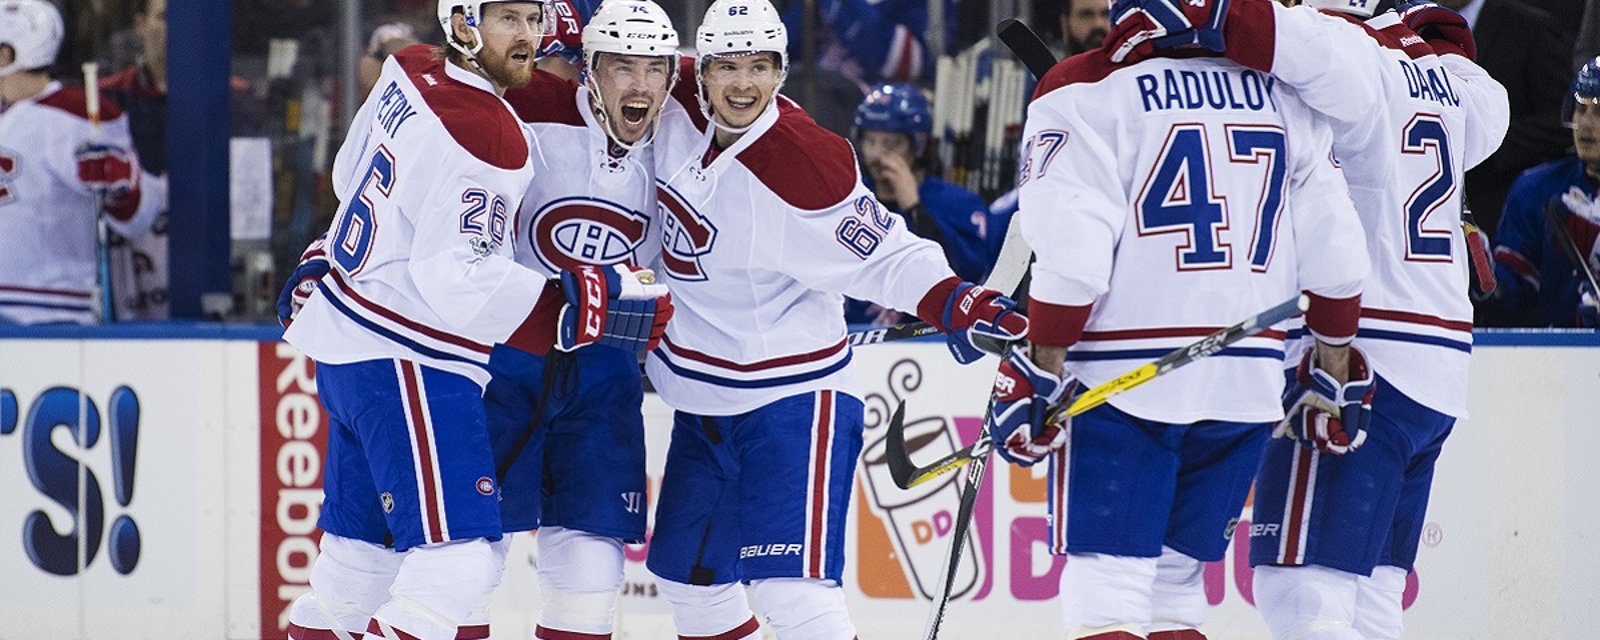 Breaking: Vegas expected to select one of two players from Canadiens roster.